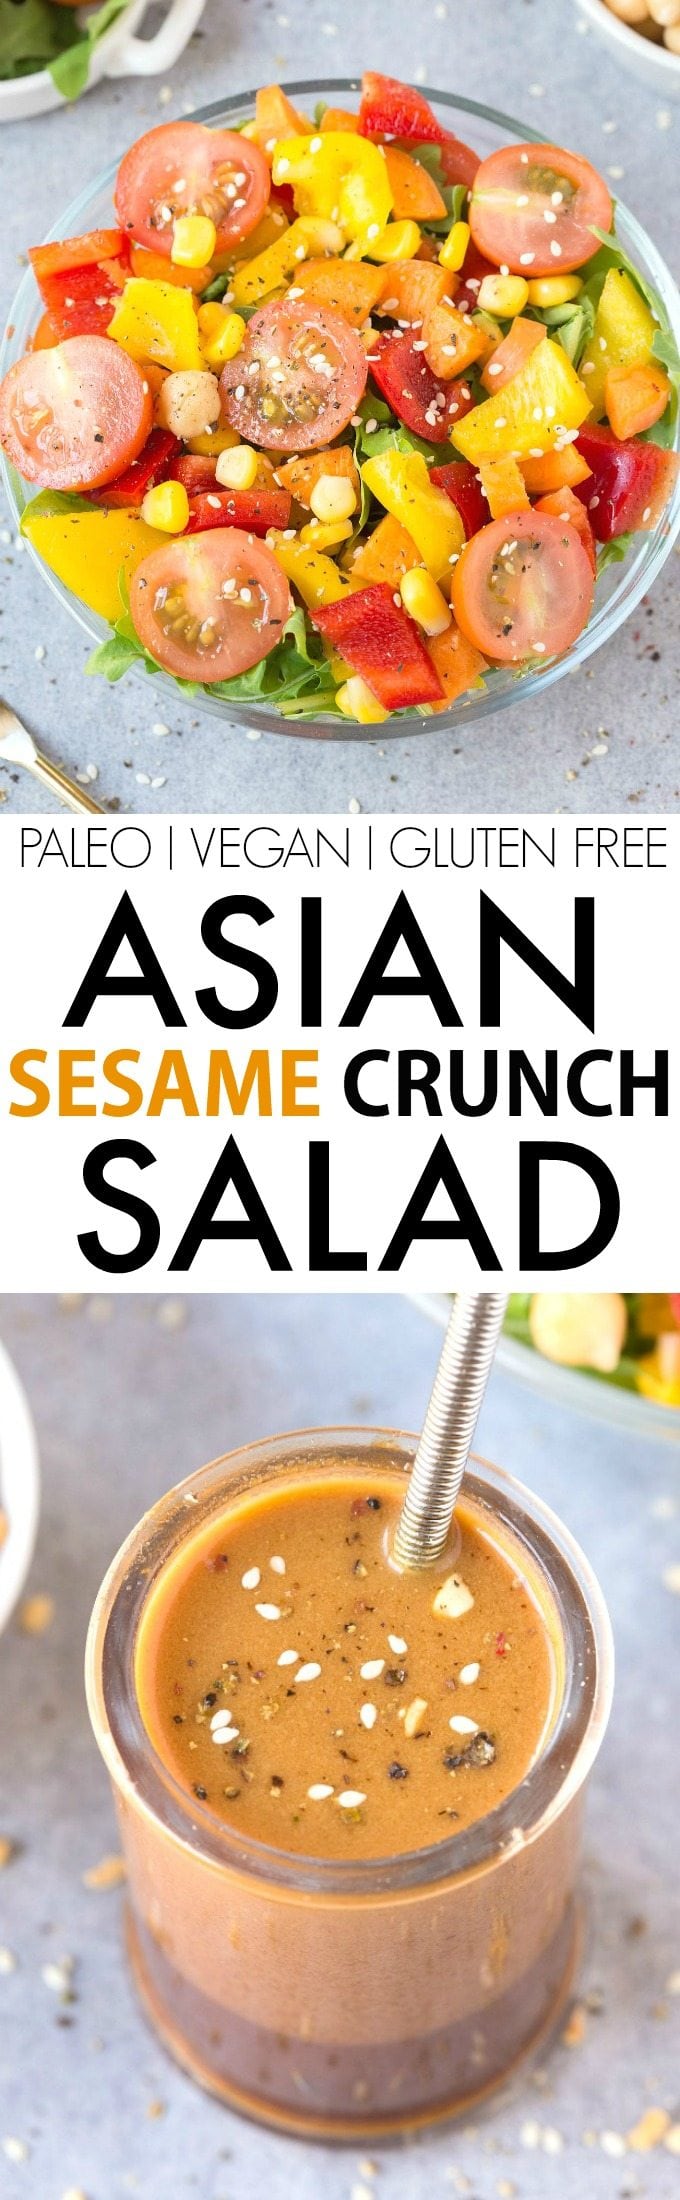 Healthy Asian Sesame Crunch Salad (V, GF, Paleo)- The BEST clean eating dressing ever, perfect to top on this texture perfect salad loaded with flavor! {vegan, gluten free, paleo, whole 30 recipe}- thebigmansworld.com